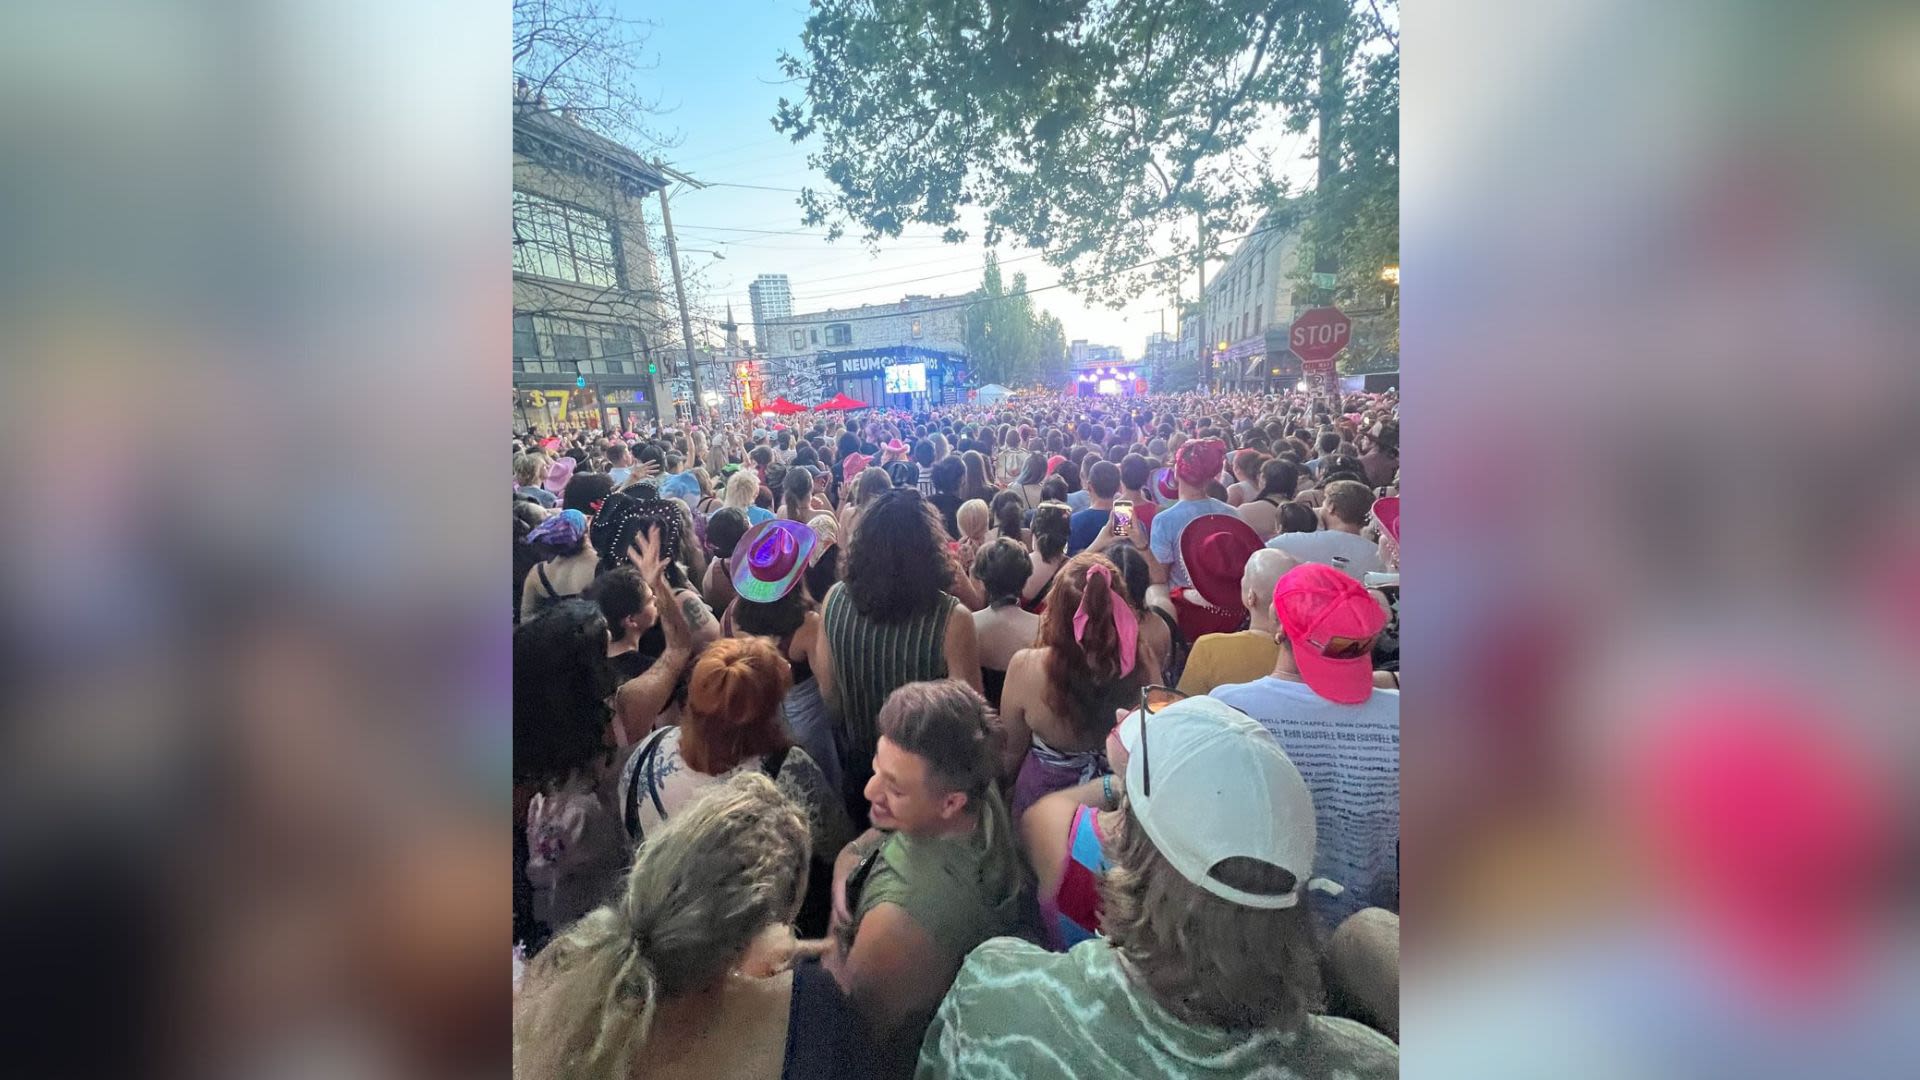 Crowd crush at Capitol Hill Block Party causes multiple people to collapse, attendees say